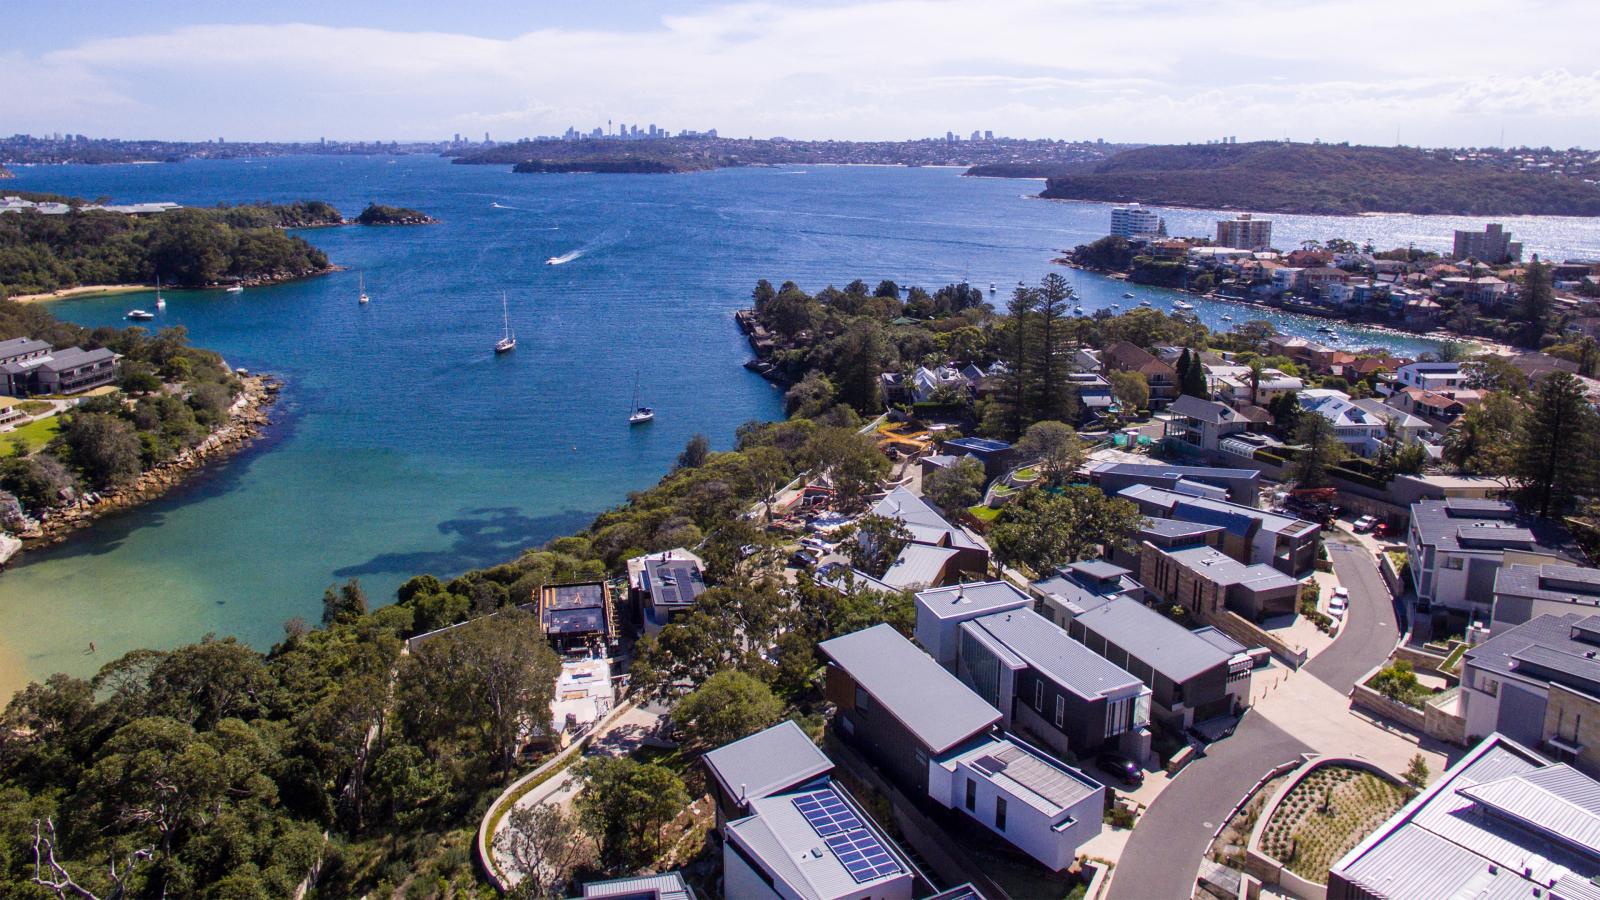 Aerial view of Spring Cove Manly, featuring a coastal residential area with modern houses and flat roofs. Below, clear blue waters with boats sailing and wooded areas are visible. In the distance, a cityscape with tall buildings under a slightly cloudy sky completes the serene scene.